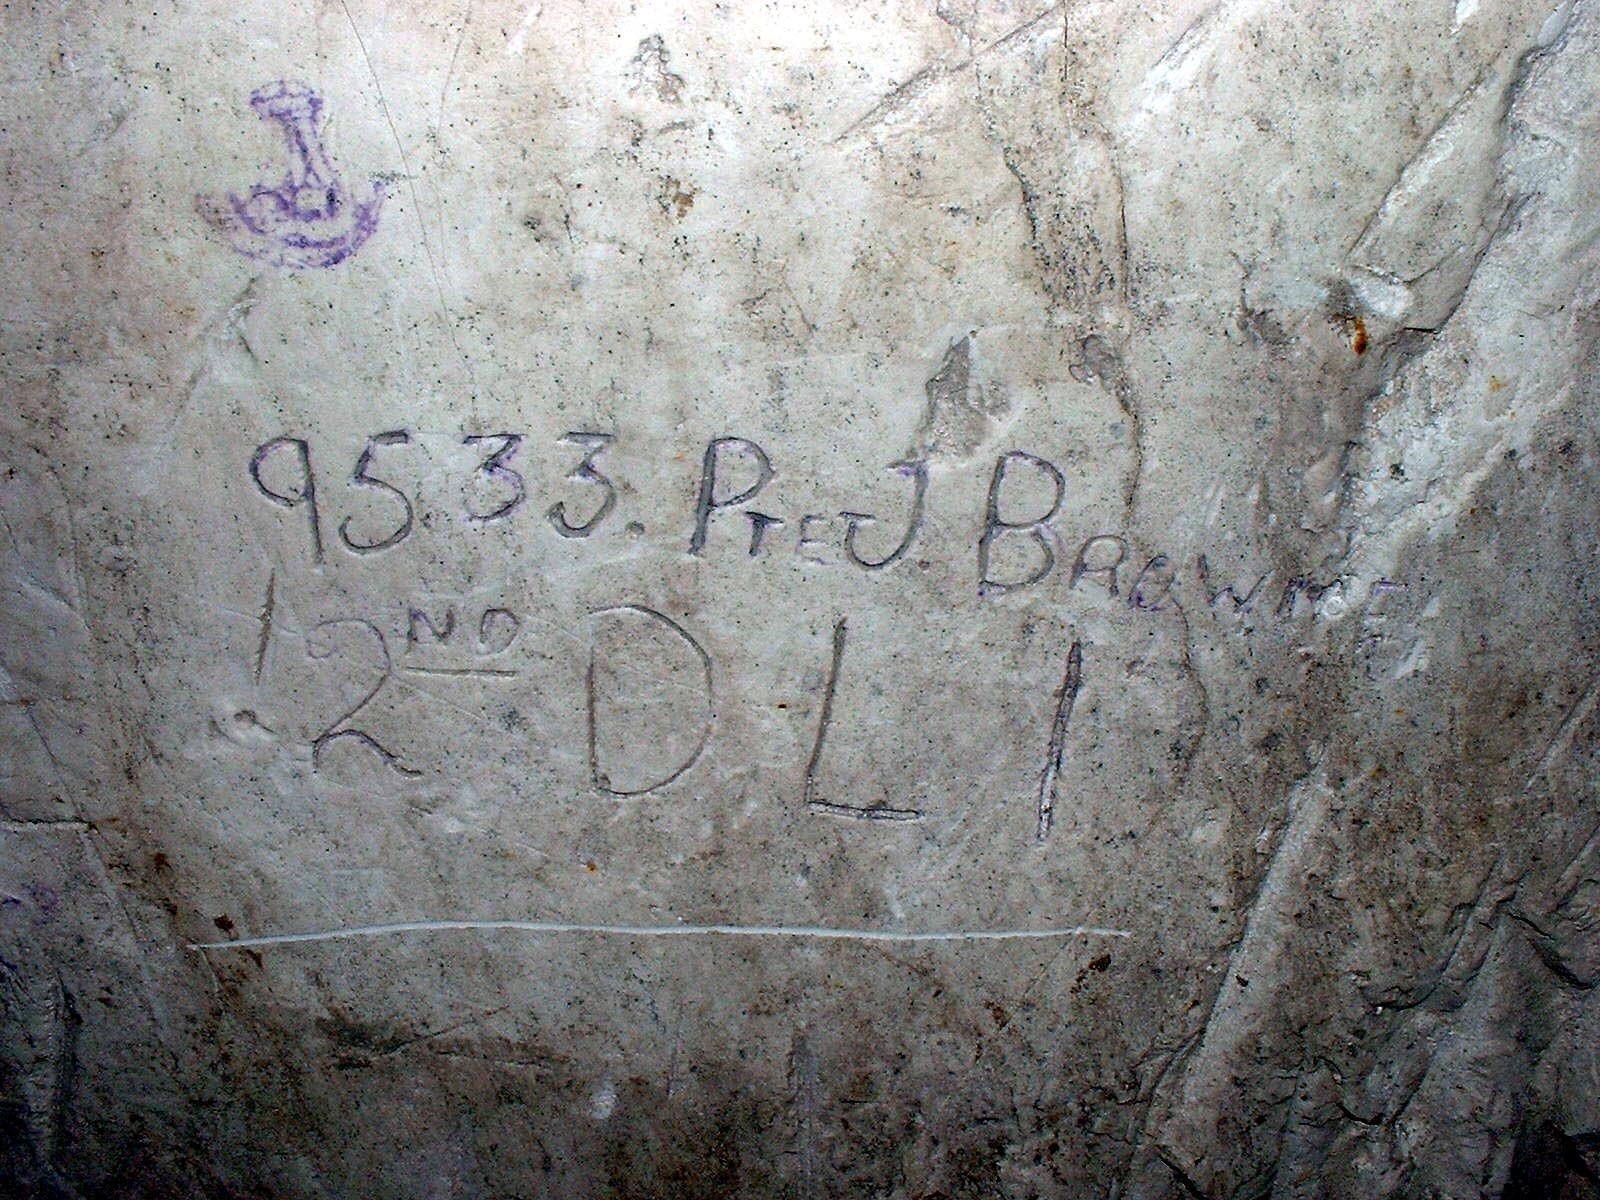 Graffiti left by Durham Light Infantry soldiers in tunnels beneath First World War battlefield is discovered a century on